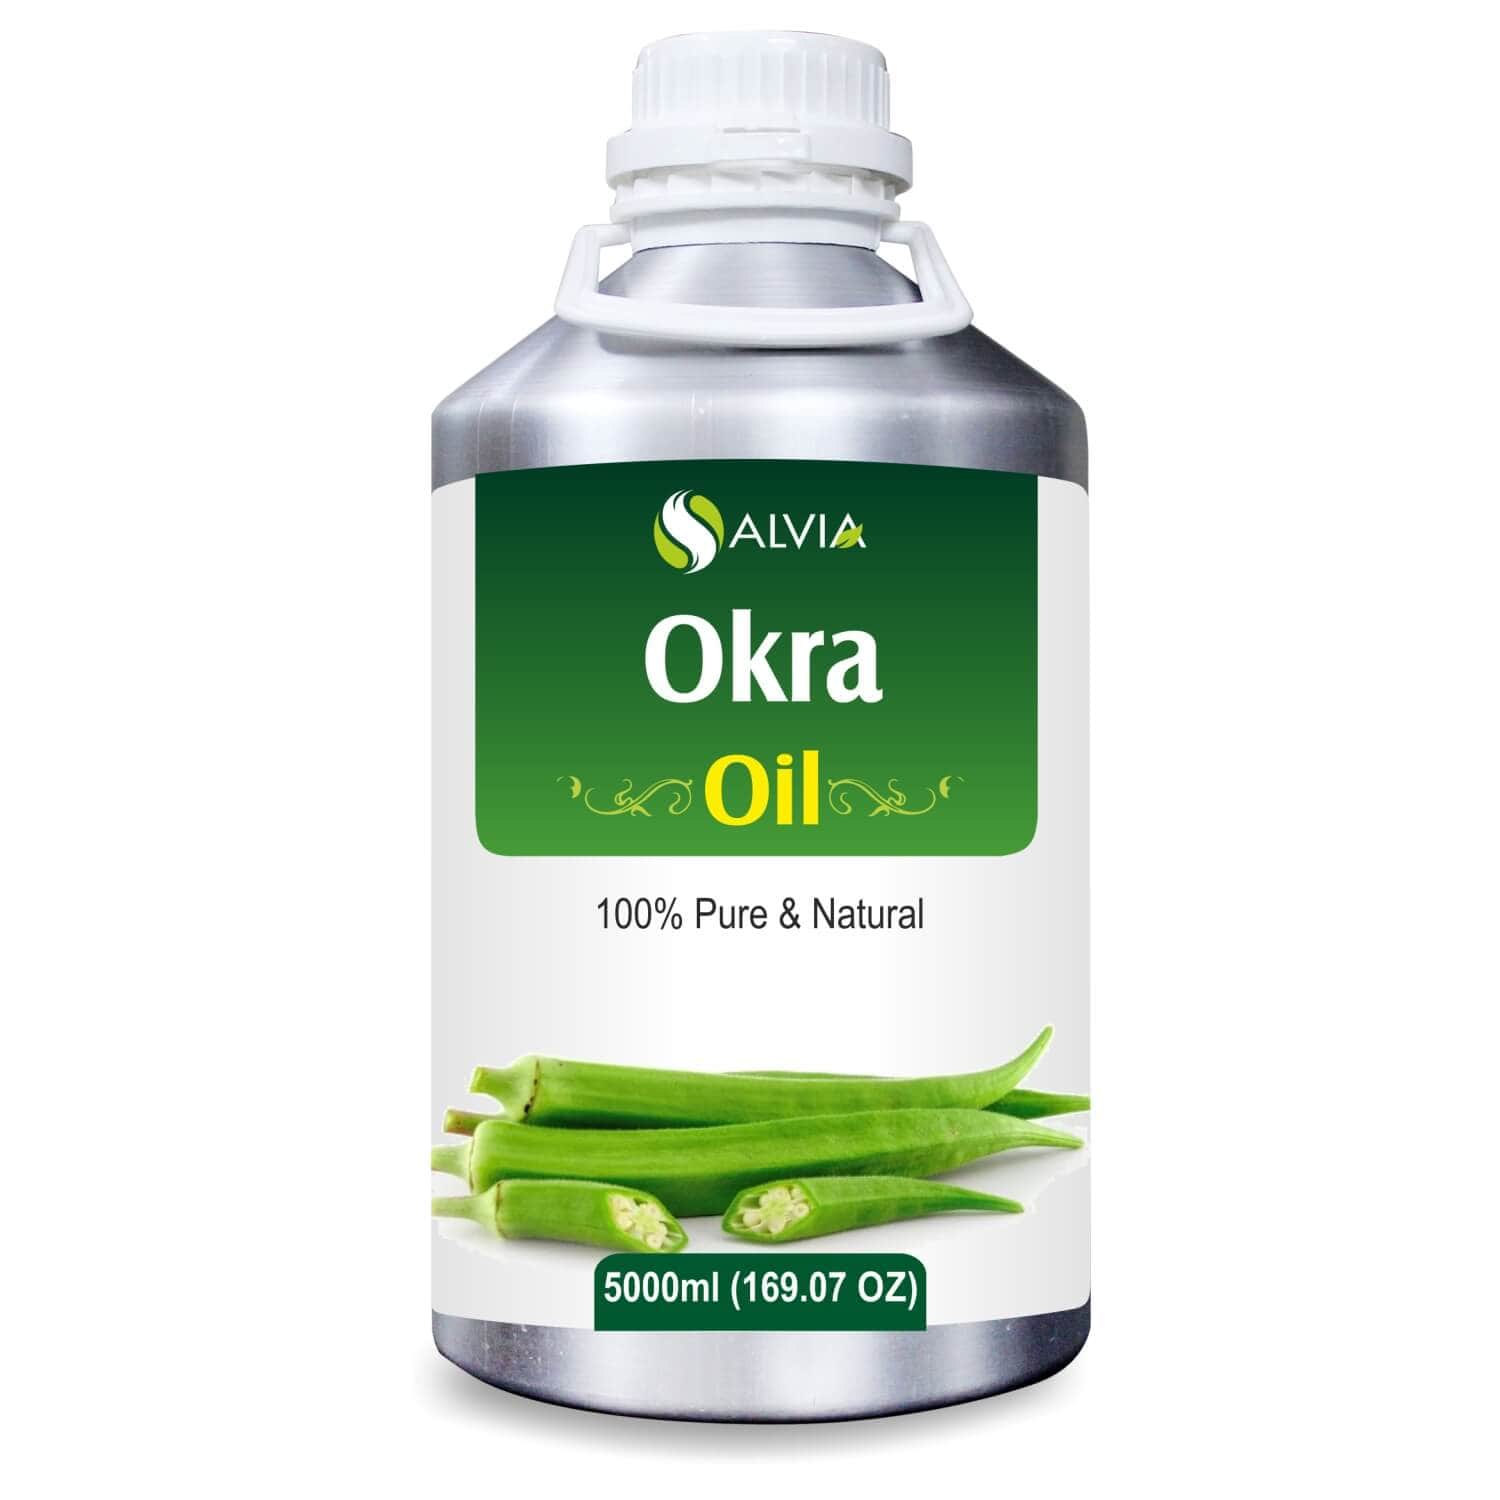 Salvia Natural Essential Oils 5000ml Okra Oil (Abelmoschus Esculentus) 100% Natural Essential Oil Best For Aromatherapy, Reduces Scars, Soothes Skin Irritation, Promotes Hair Growth